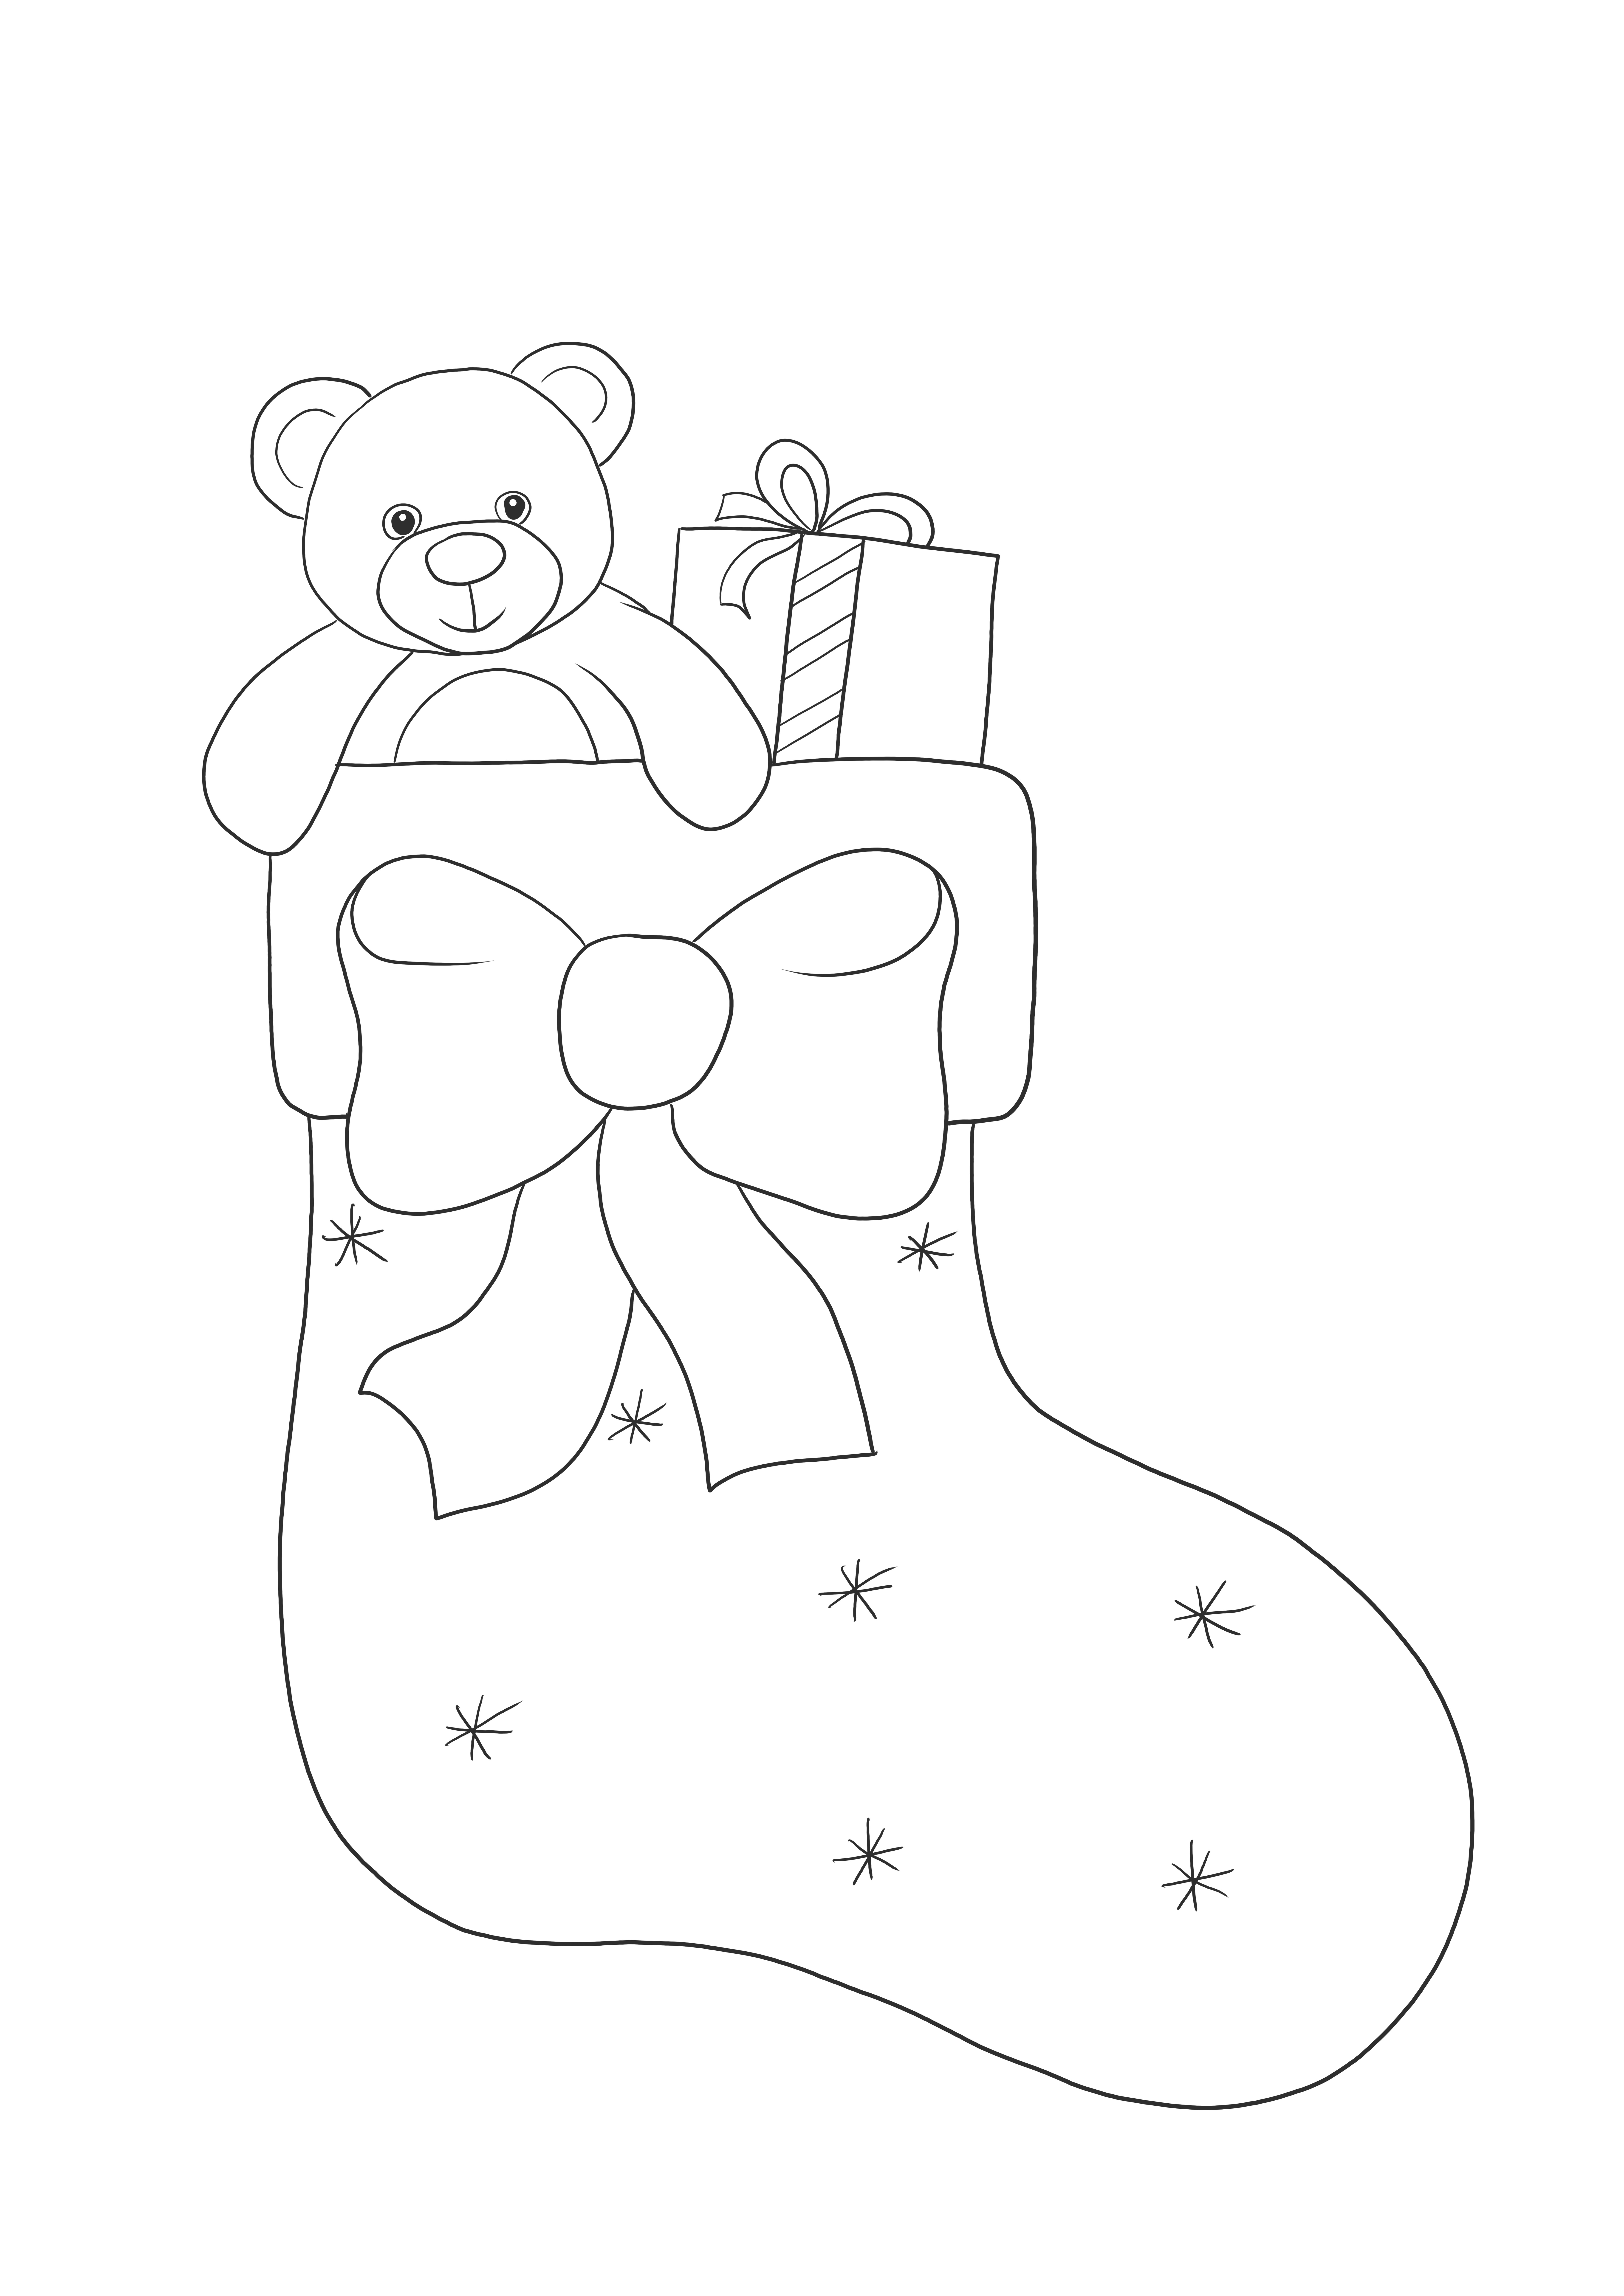 Christmas stocking full of presents free printing and coloring image